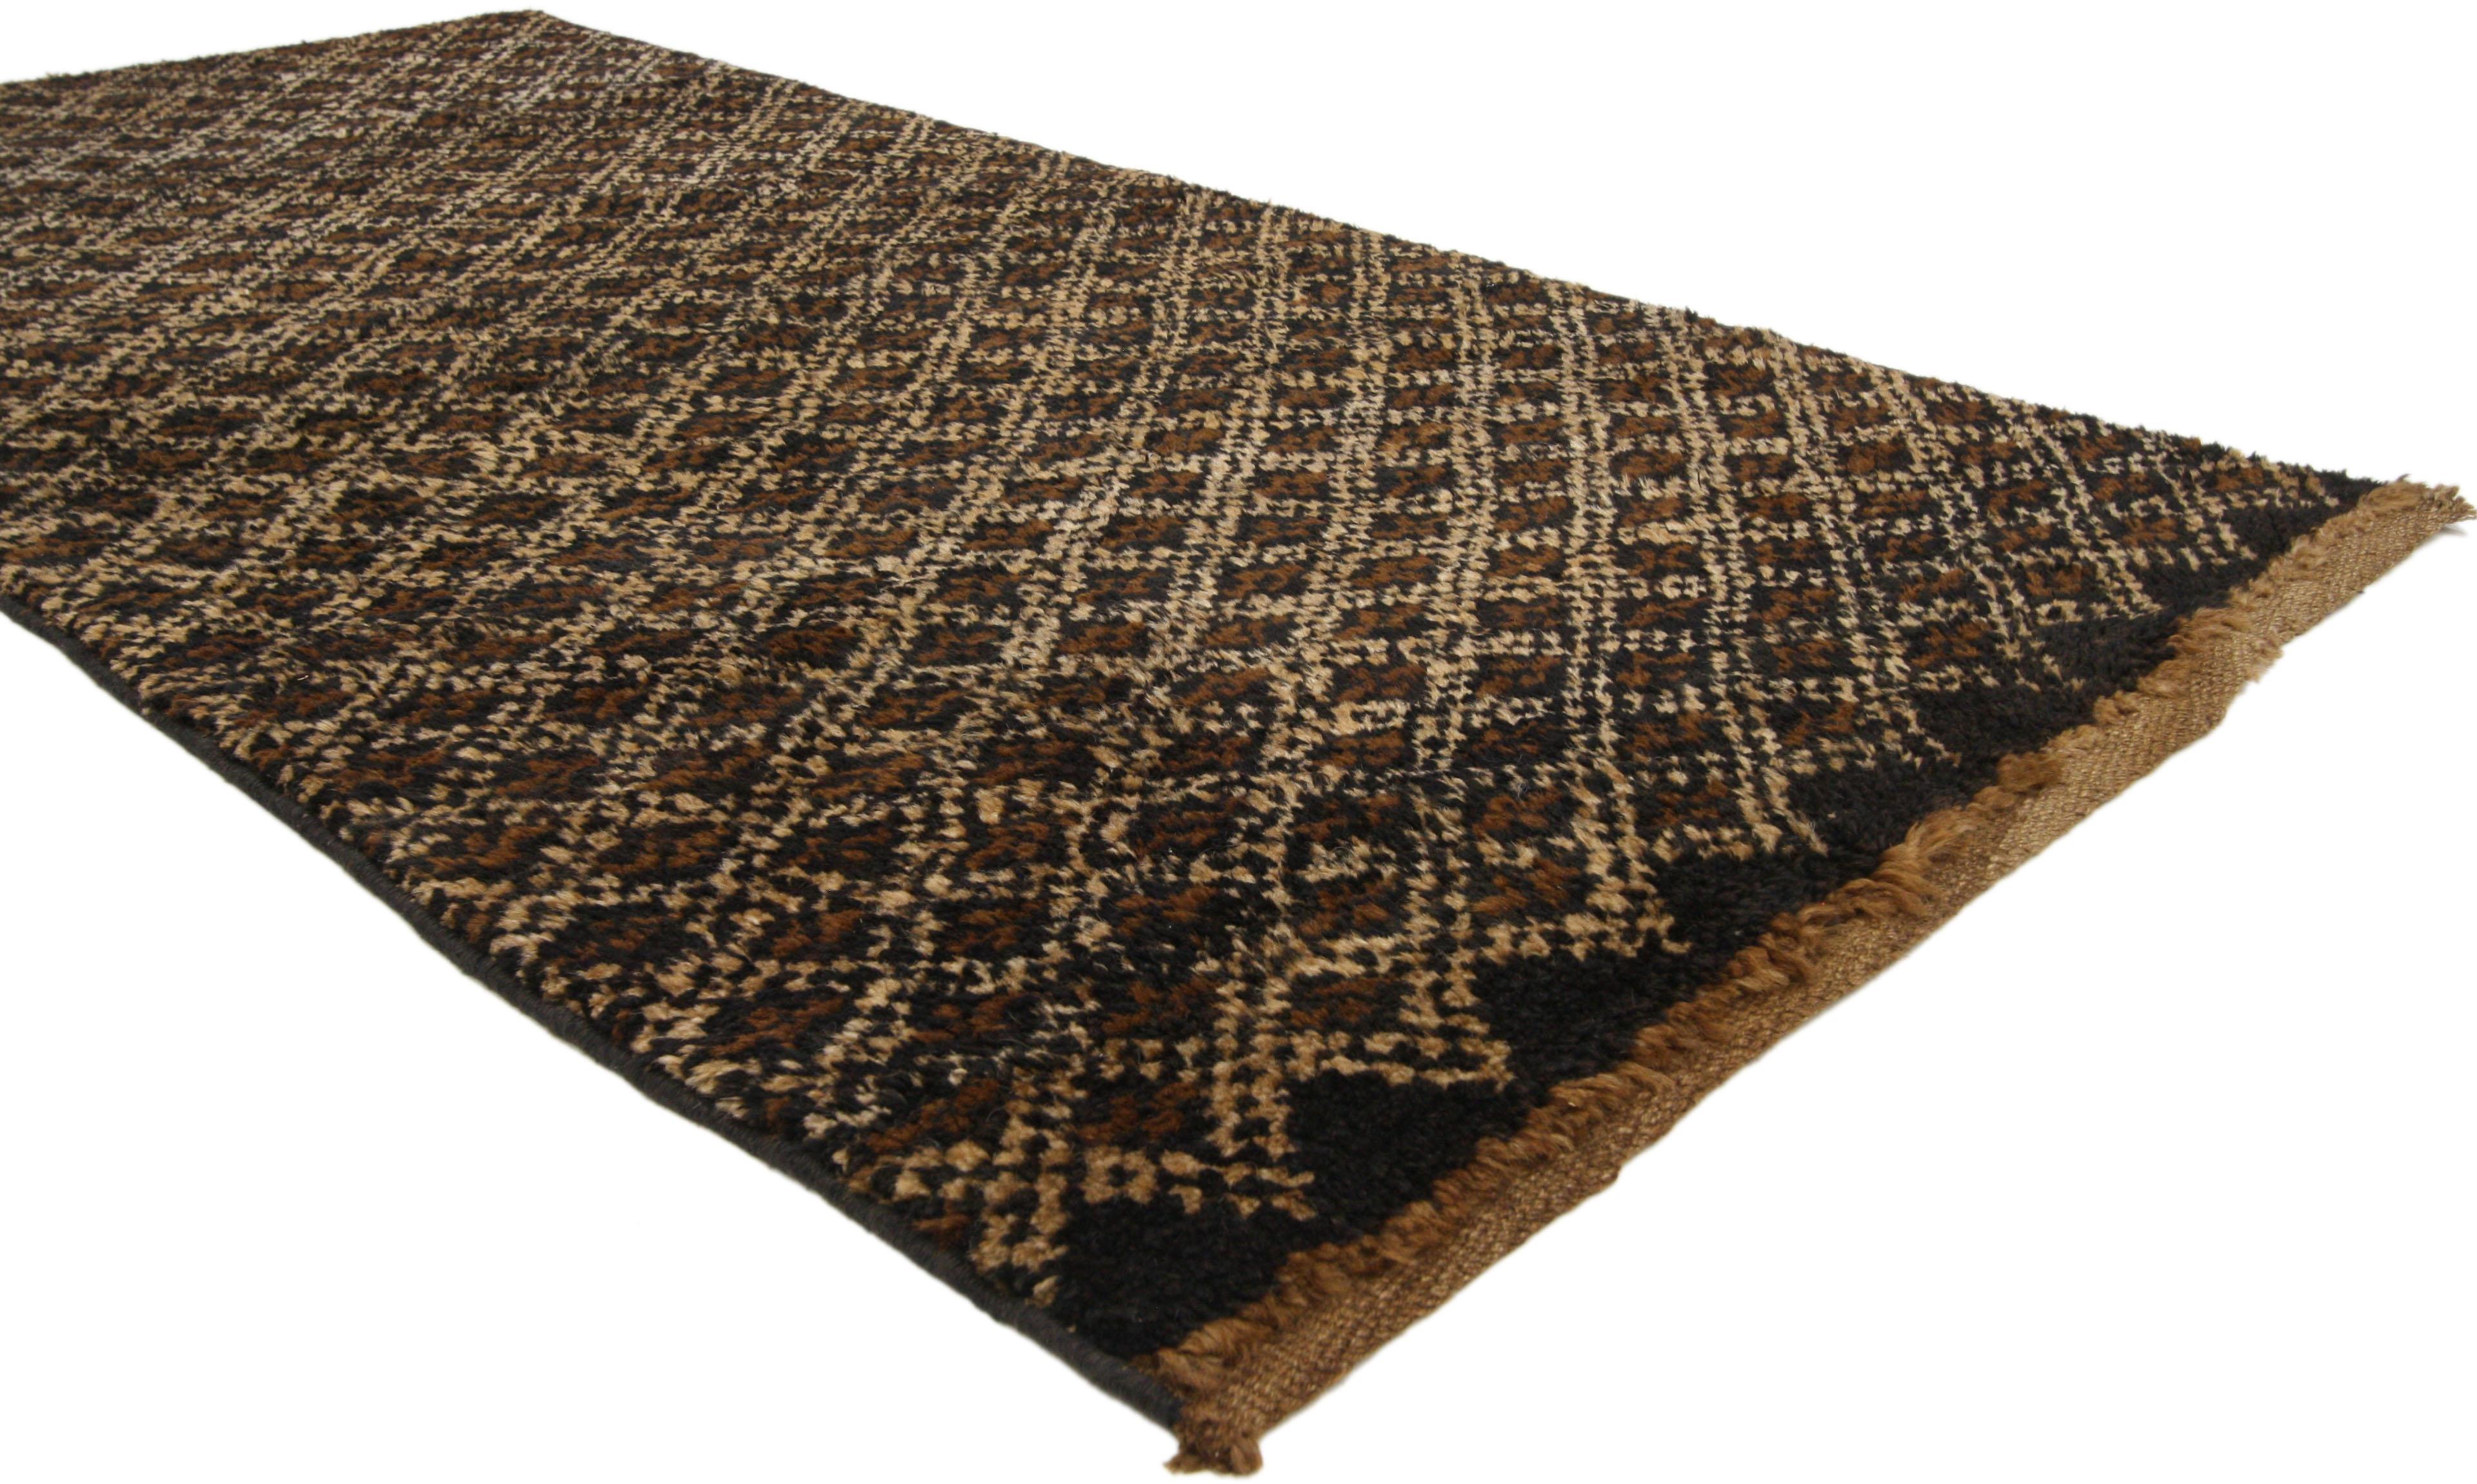 52294 Vintage Turkish Tulu Accent Rug with Mid-Century Modern Style, Small Shag Runner 03'00 x 05'11. This vintage Turkish Tulu accent rug with Mid-Century Modern style features an all-over diamond trellis pattern. With its Minimalist approach and